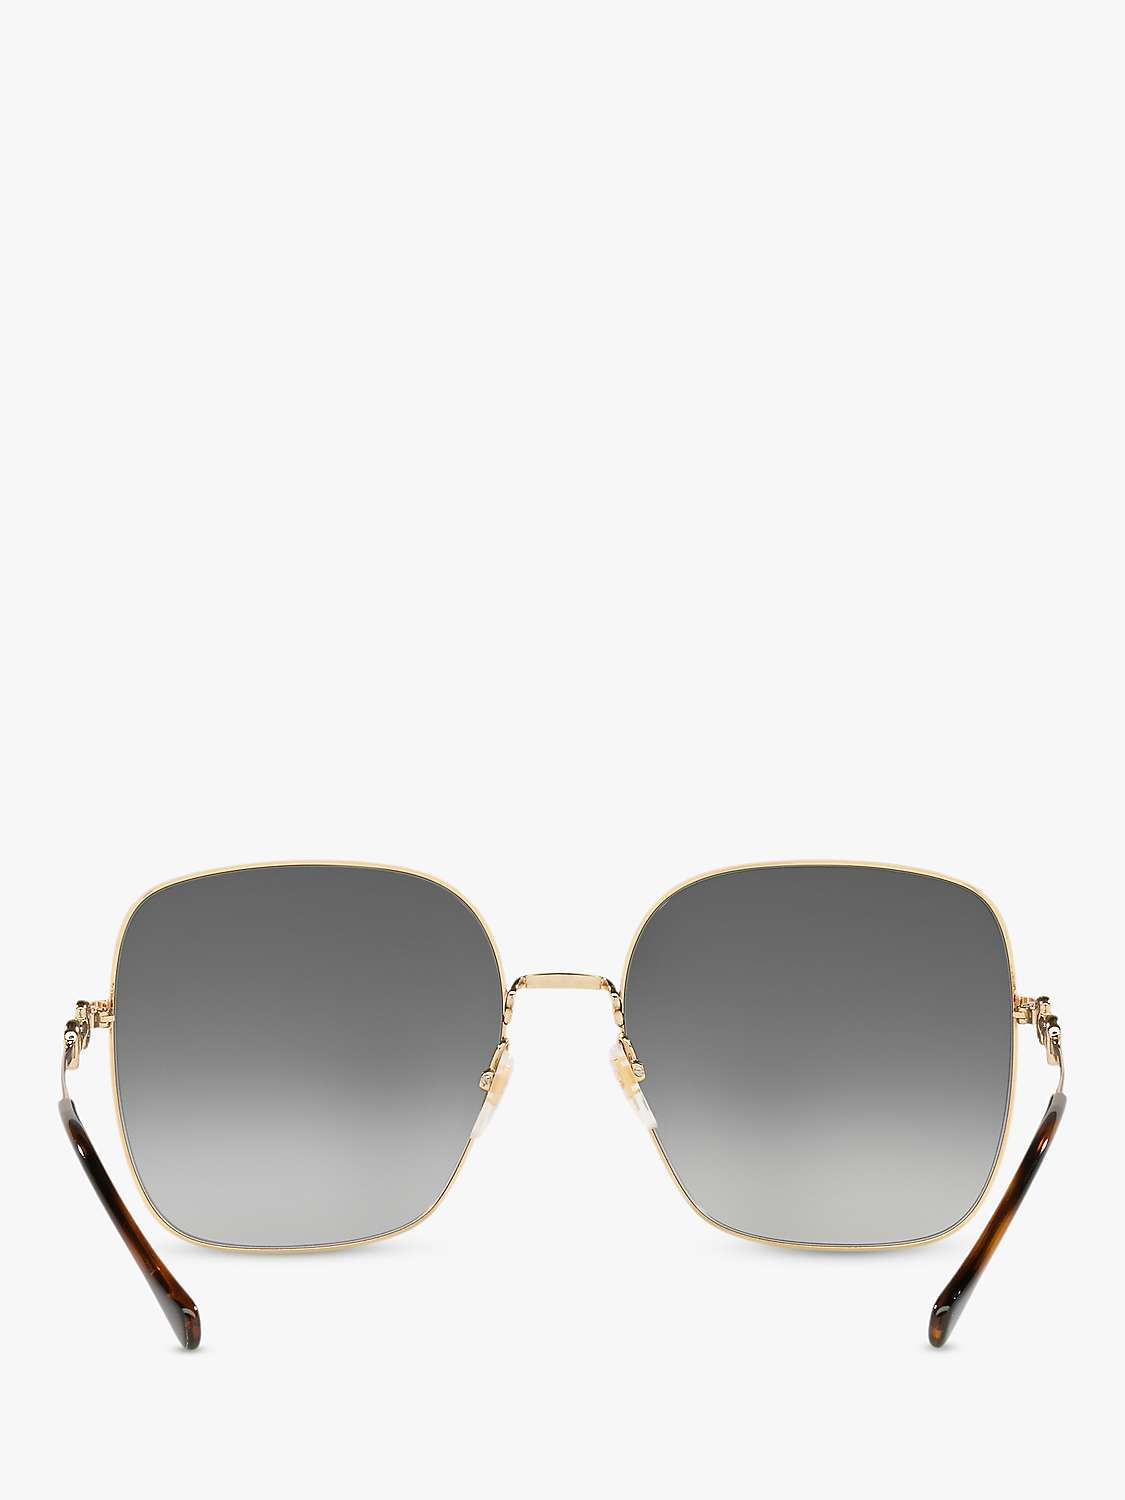 Buy Gucci GG0879S Women's Square Sunglasses Online at johnlewis.com